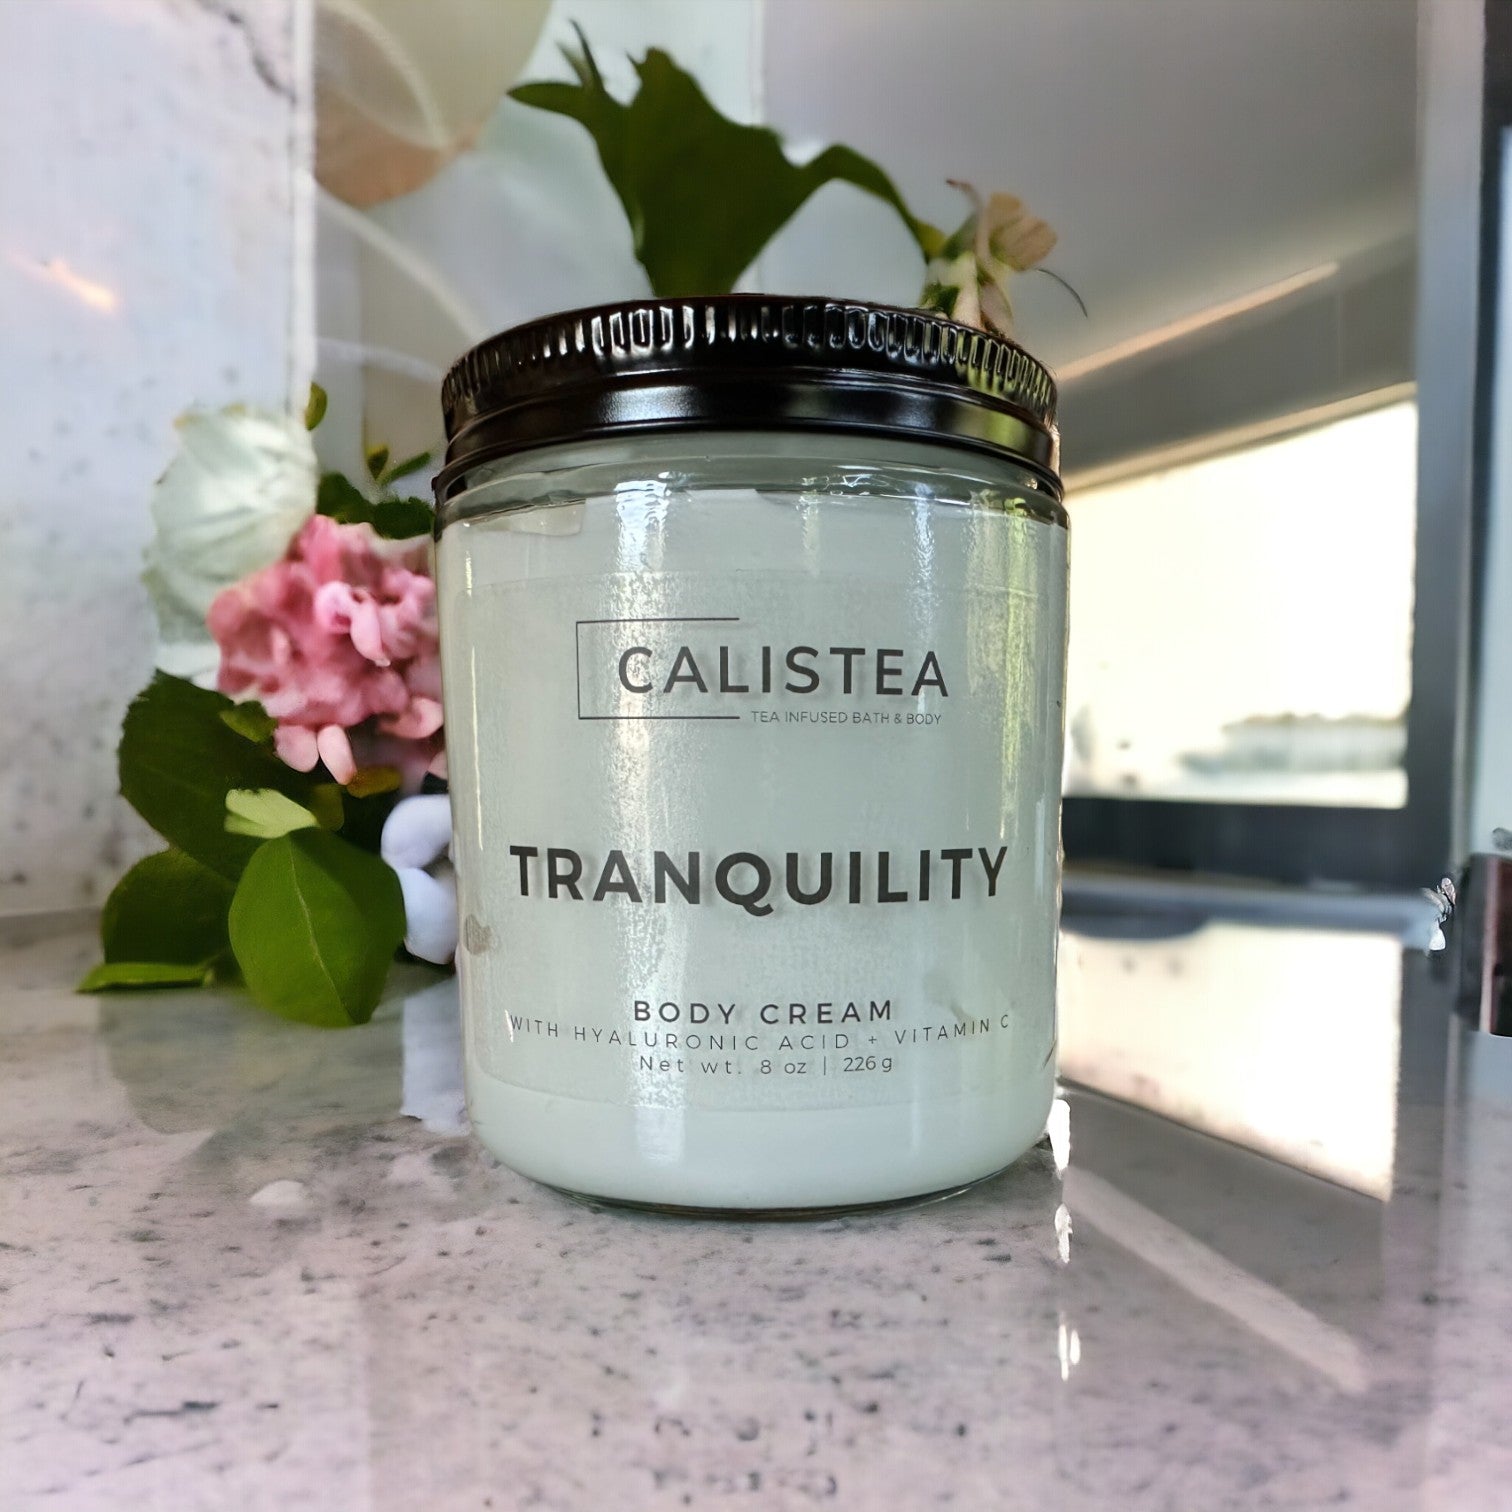 Tranquility - Calistea8 oz by volume